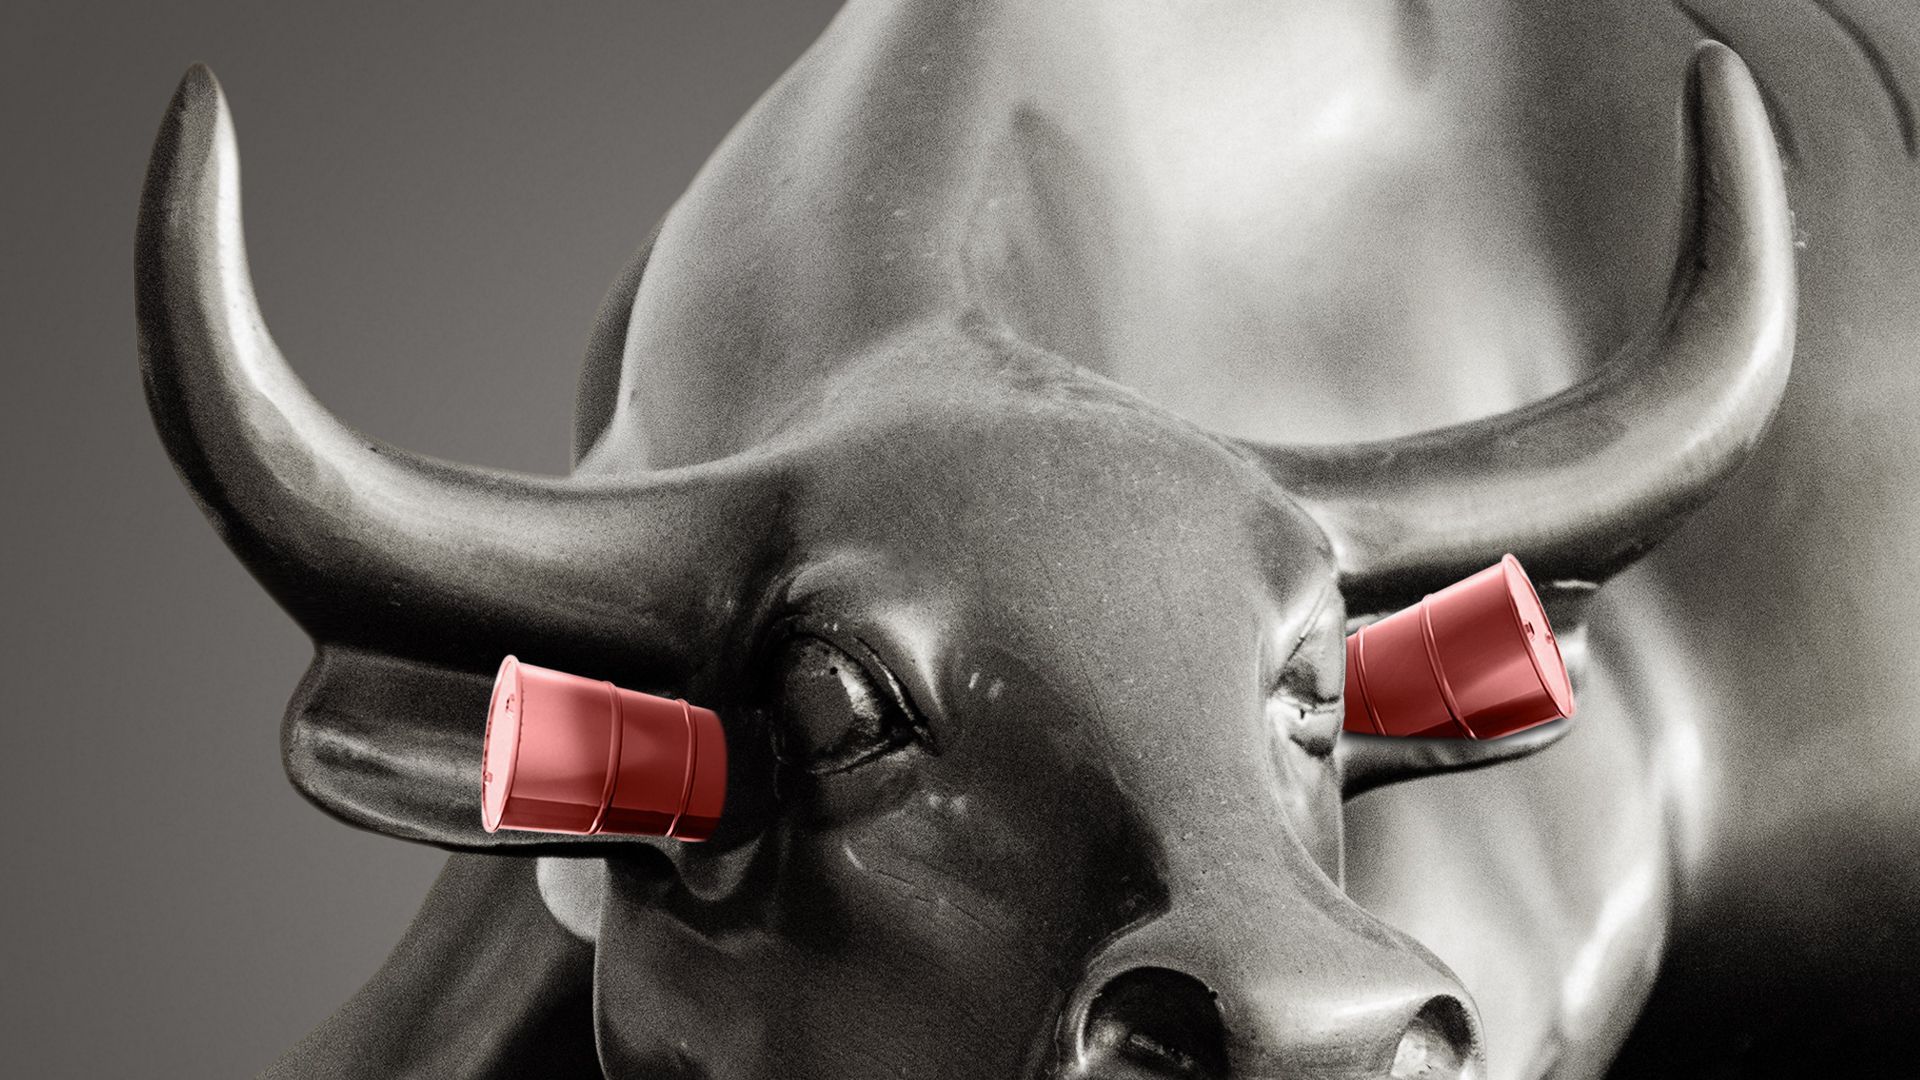 Illustration of Bull of Wall Street with oil barrels acting as ear plugs.